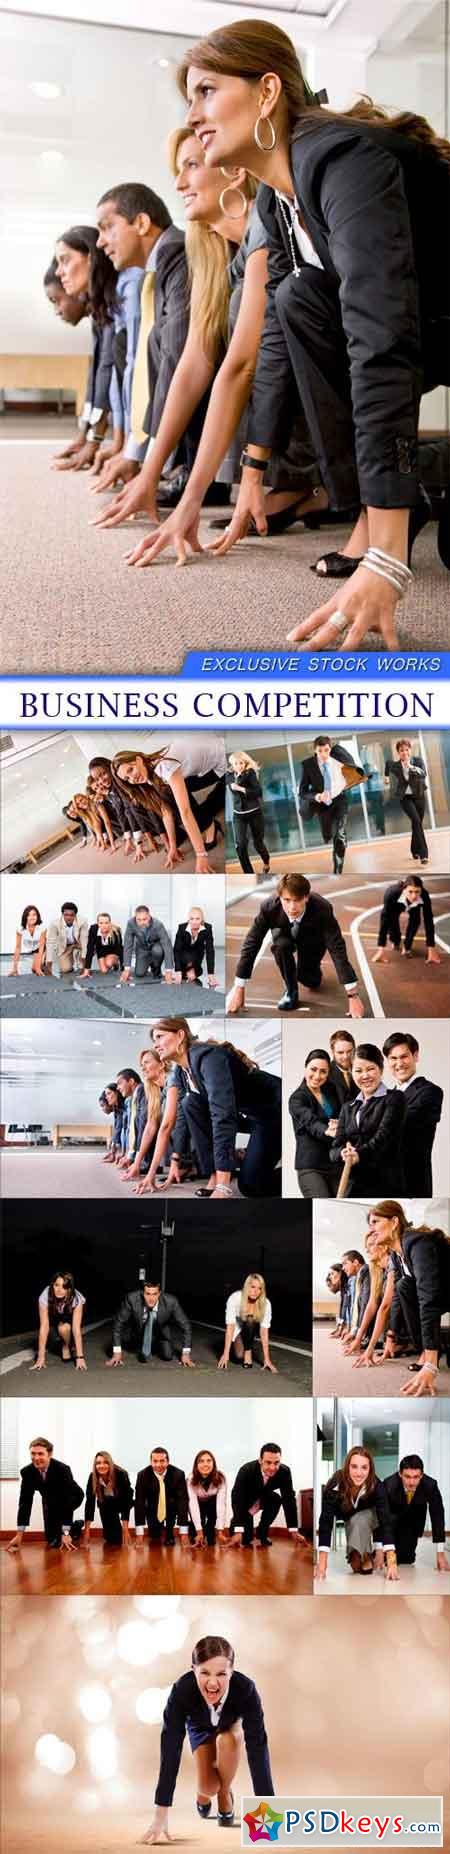 Business competition 11X JPEG